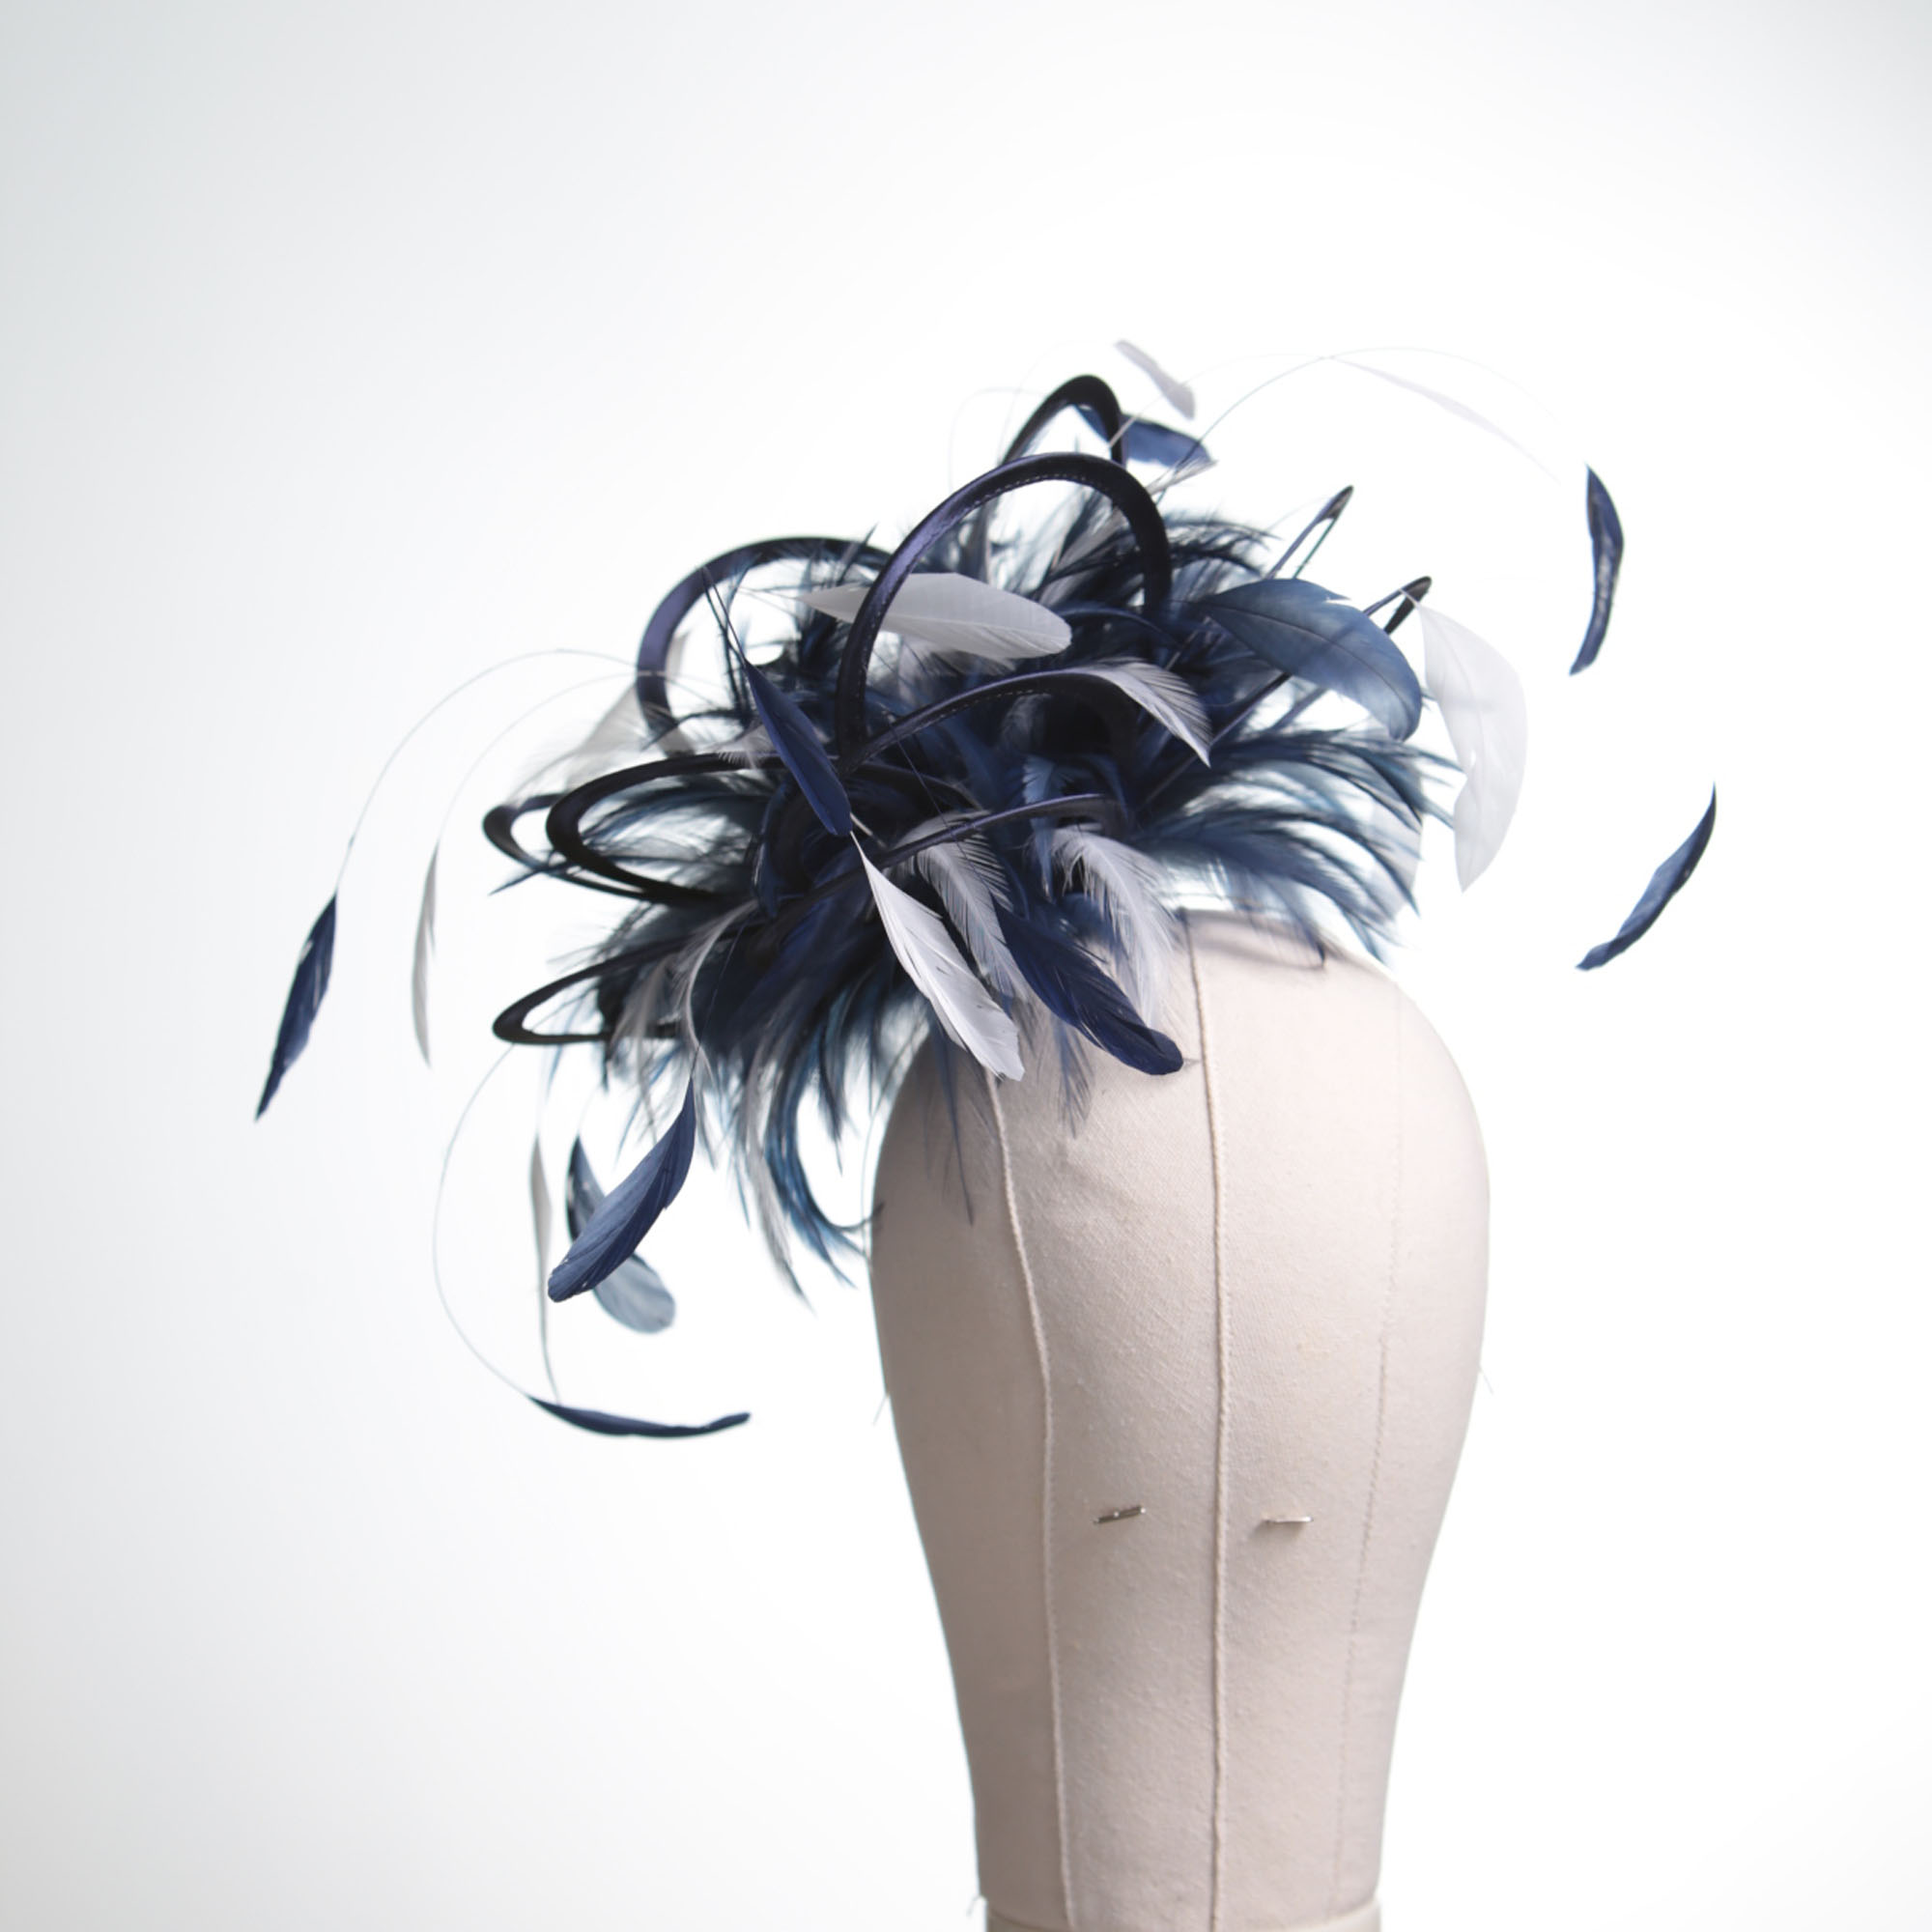 Ladies formal Navy Blue and White medium feather and satin loop fascinator hat. Suitable for a wedding or ladies day at the races